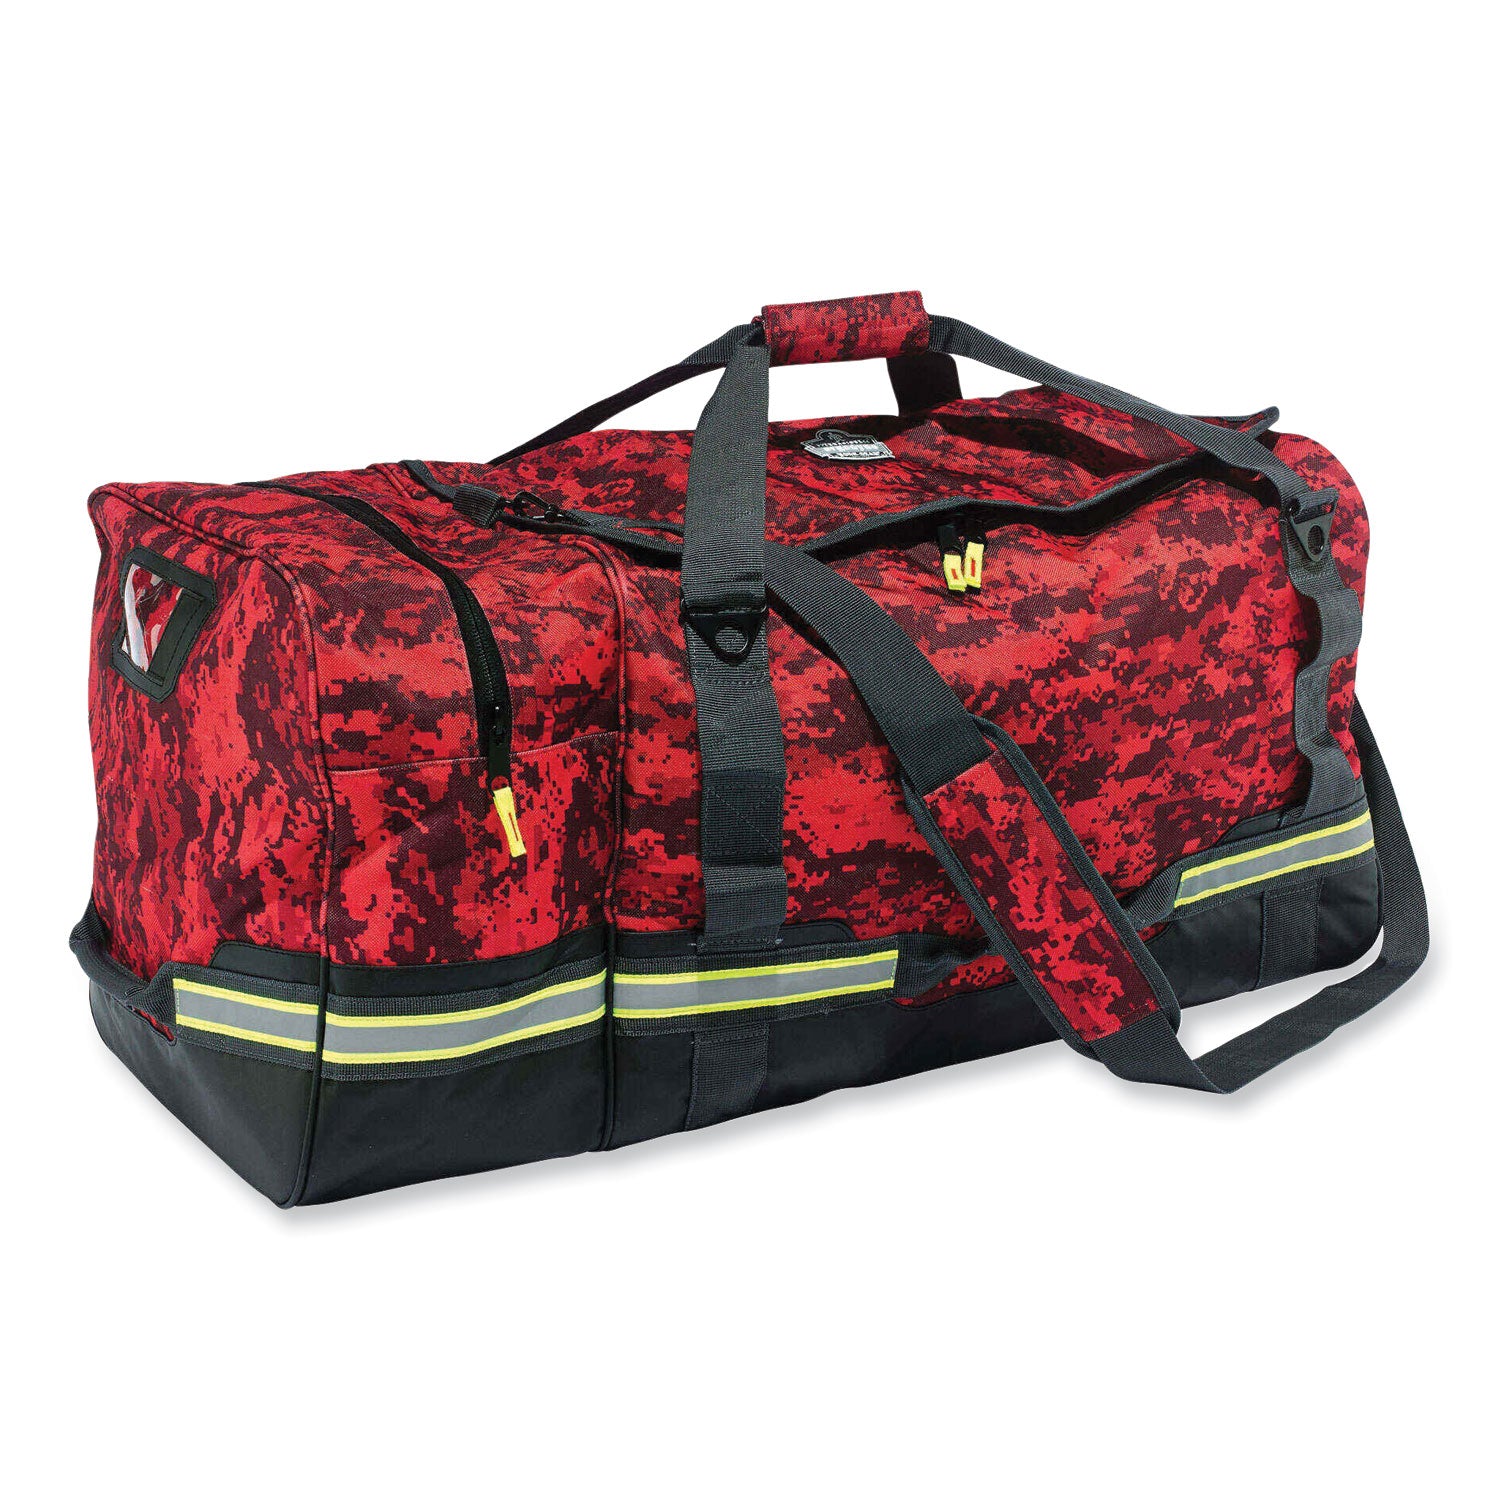 arsenal-5008-fire-+-safety-gear-bag-16-x-31-x-155-red-camo-ships-in-1-3-business-days_ego13008 - 1